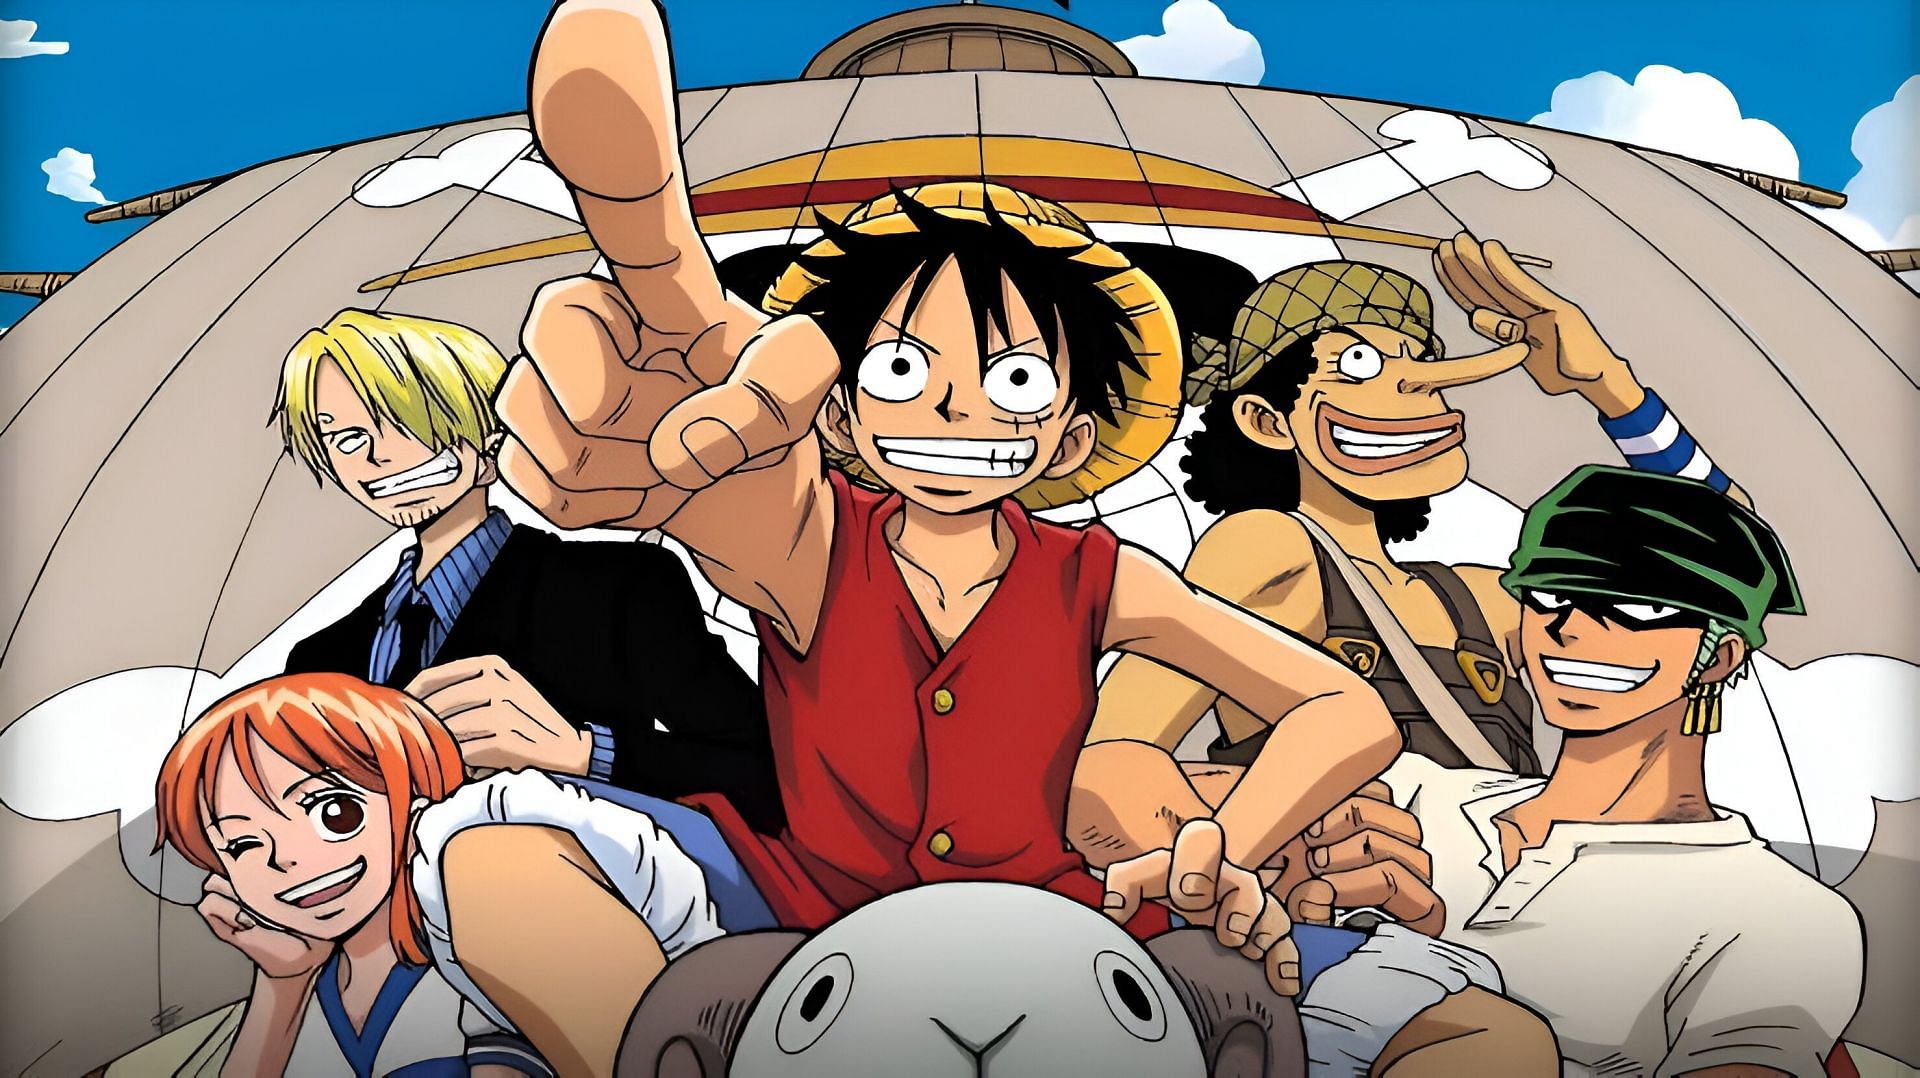 The starting members of the Straw Hats (Image via Toei Animation)